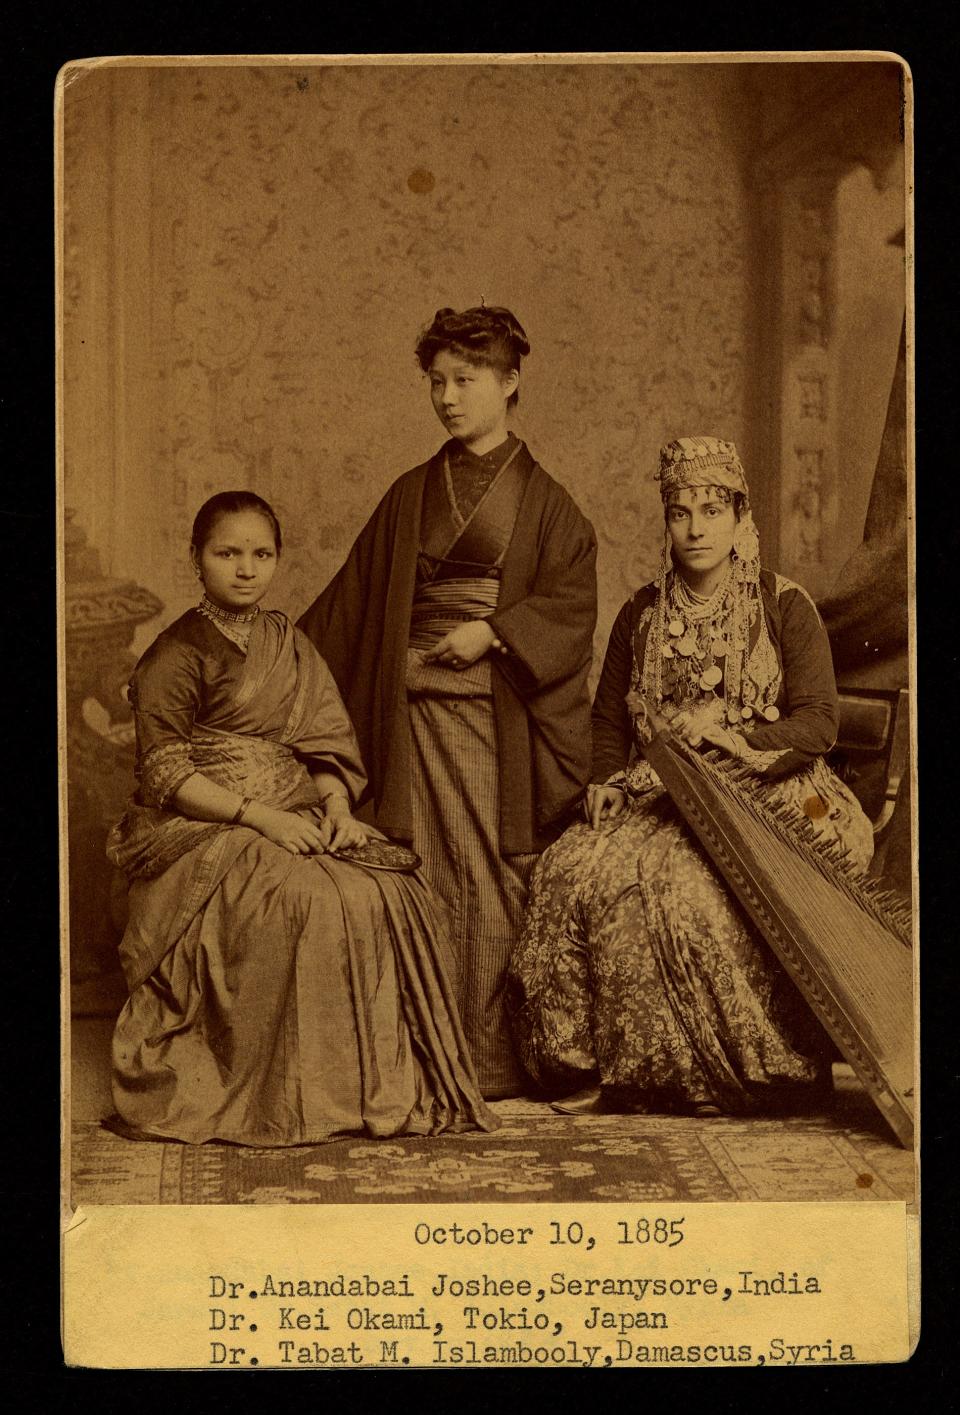 Anandi Joshi, the first Indian woman to receive a medical degree for an American college is seen in this photo taken at a reception at the Woman's College of Pennsylvania on Oct. 10, 1885, Also in the photo are her classmates Kei Okami from Japan and Sabat Islambouli from Syria, who were the first women from their countries to earn medical degrees from a Western college.